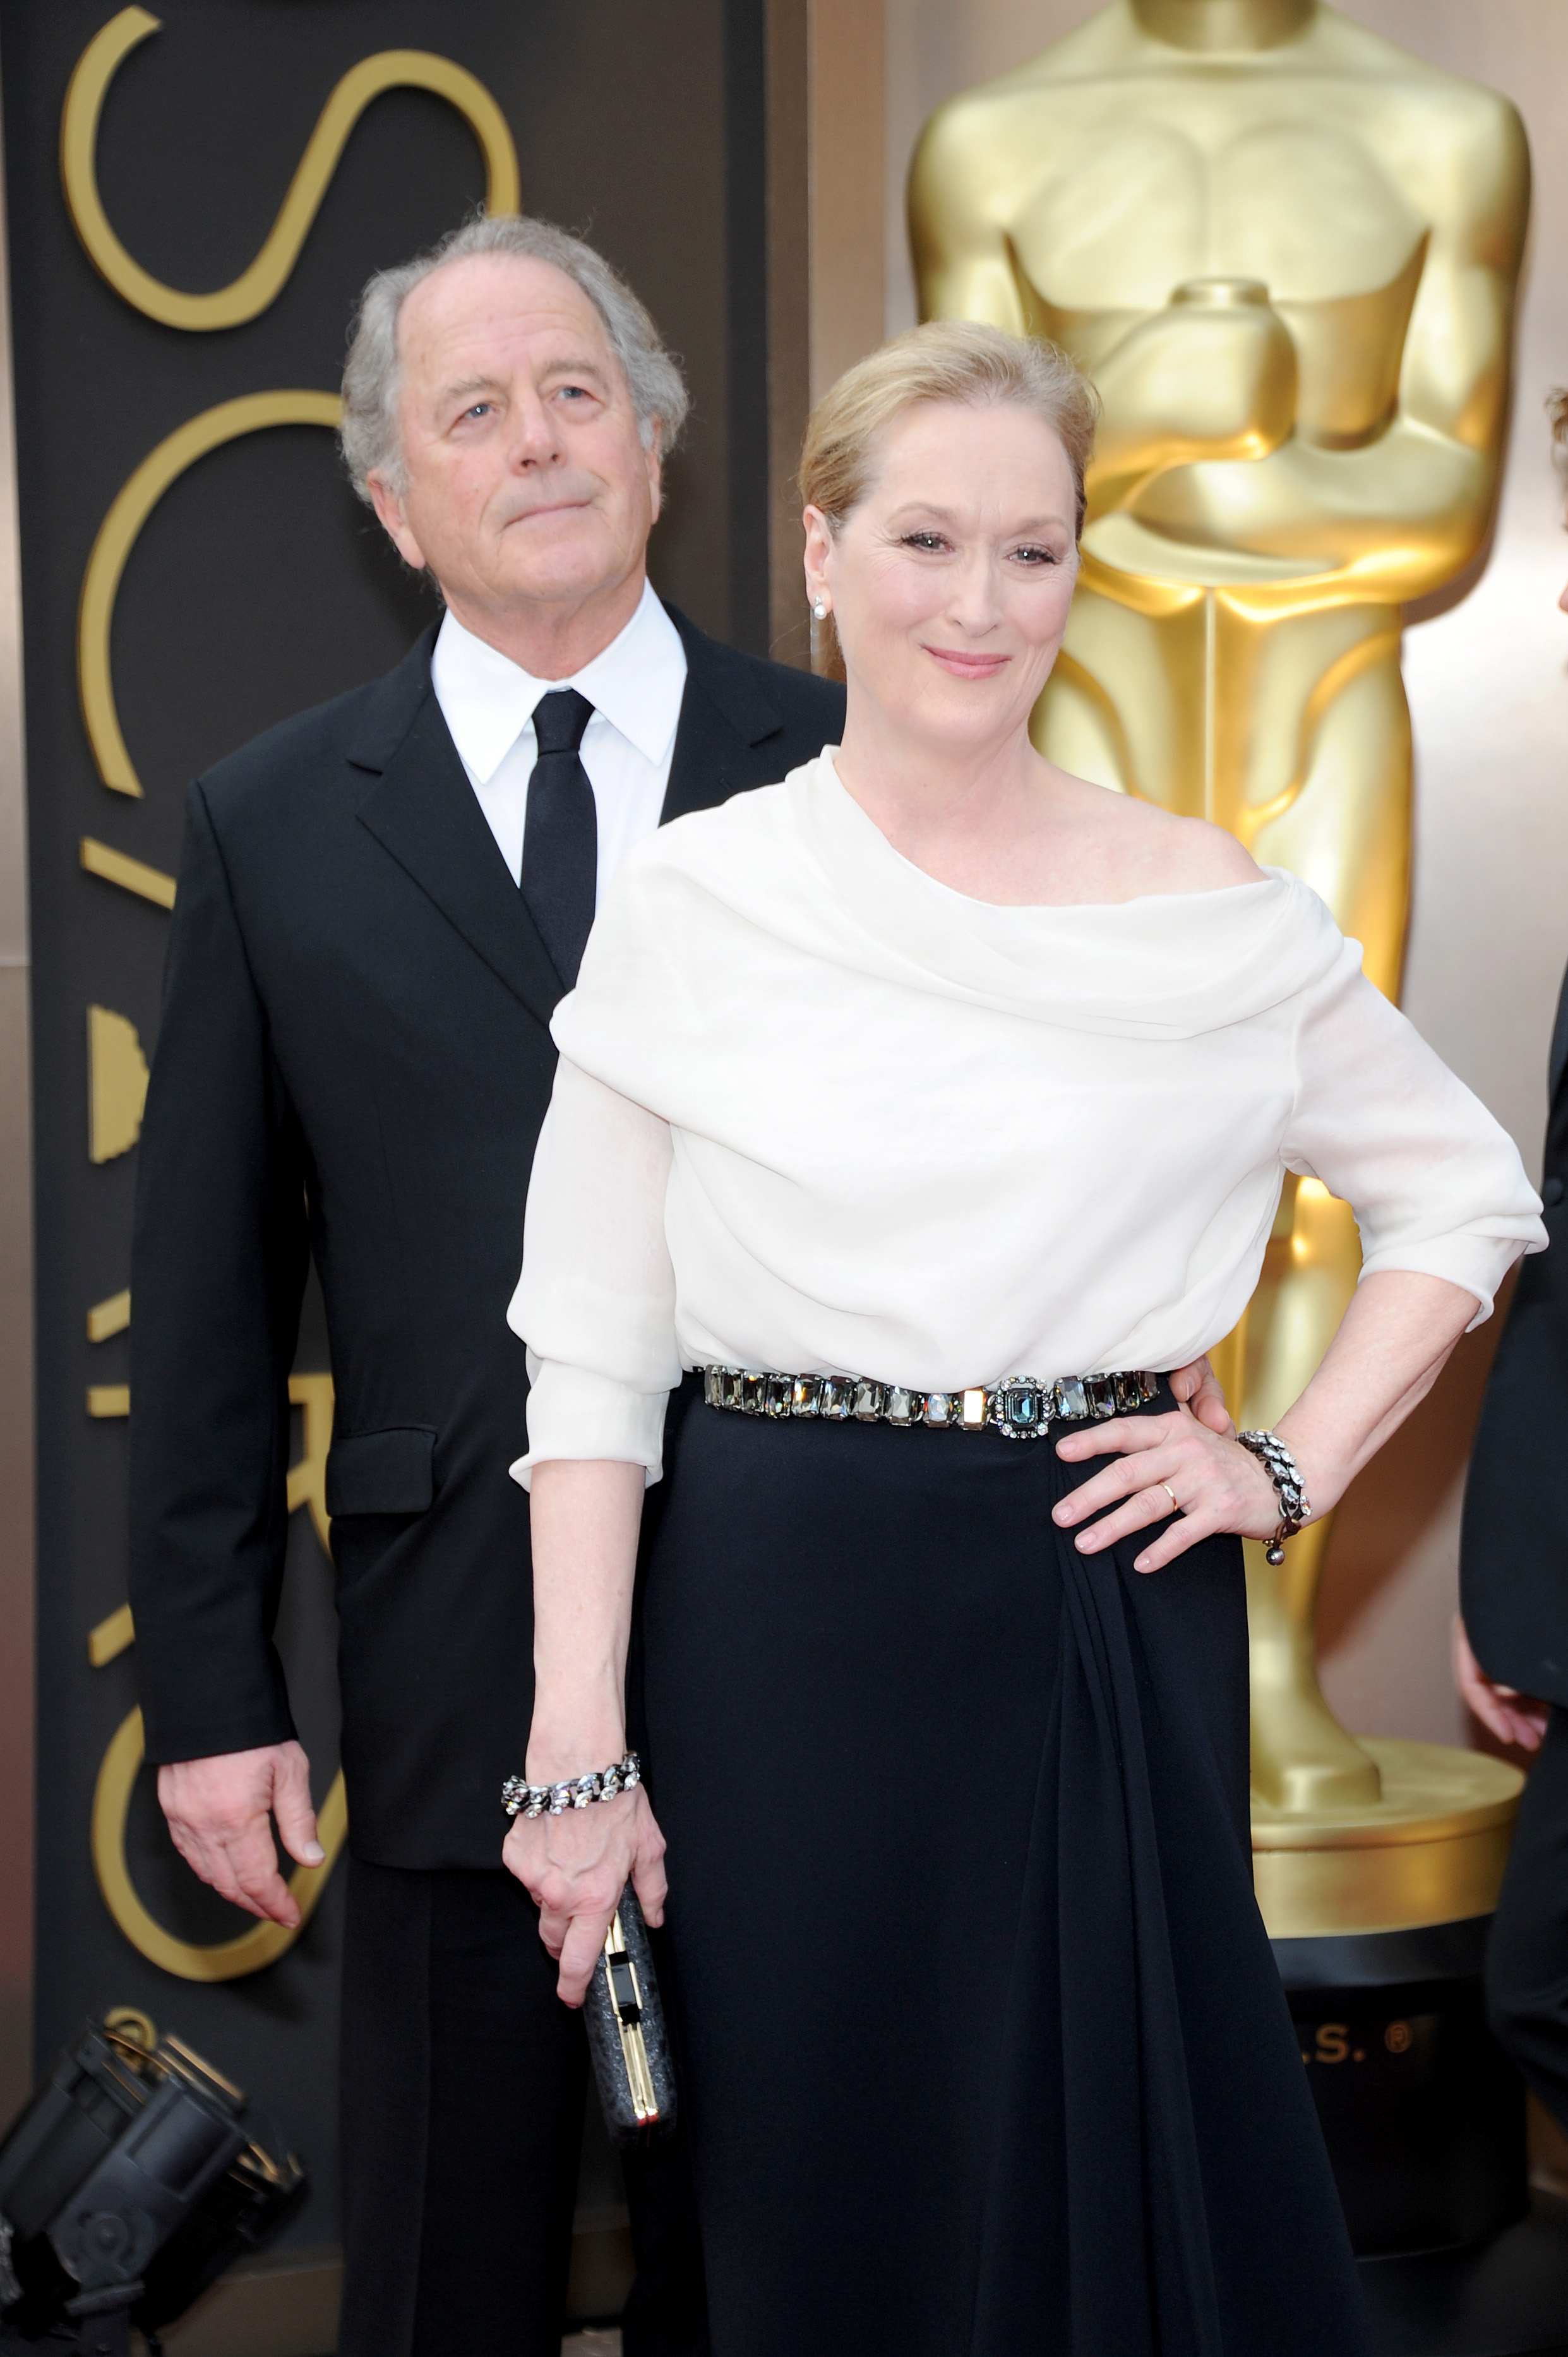 Don Gummer and Meryl Streep at the Oscars at Hollywood & Highland Center on March 2, 2014 in Hollywood, California. | Source: Getty Images